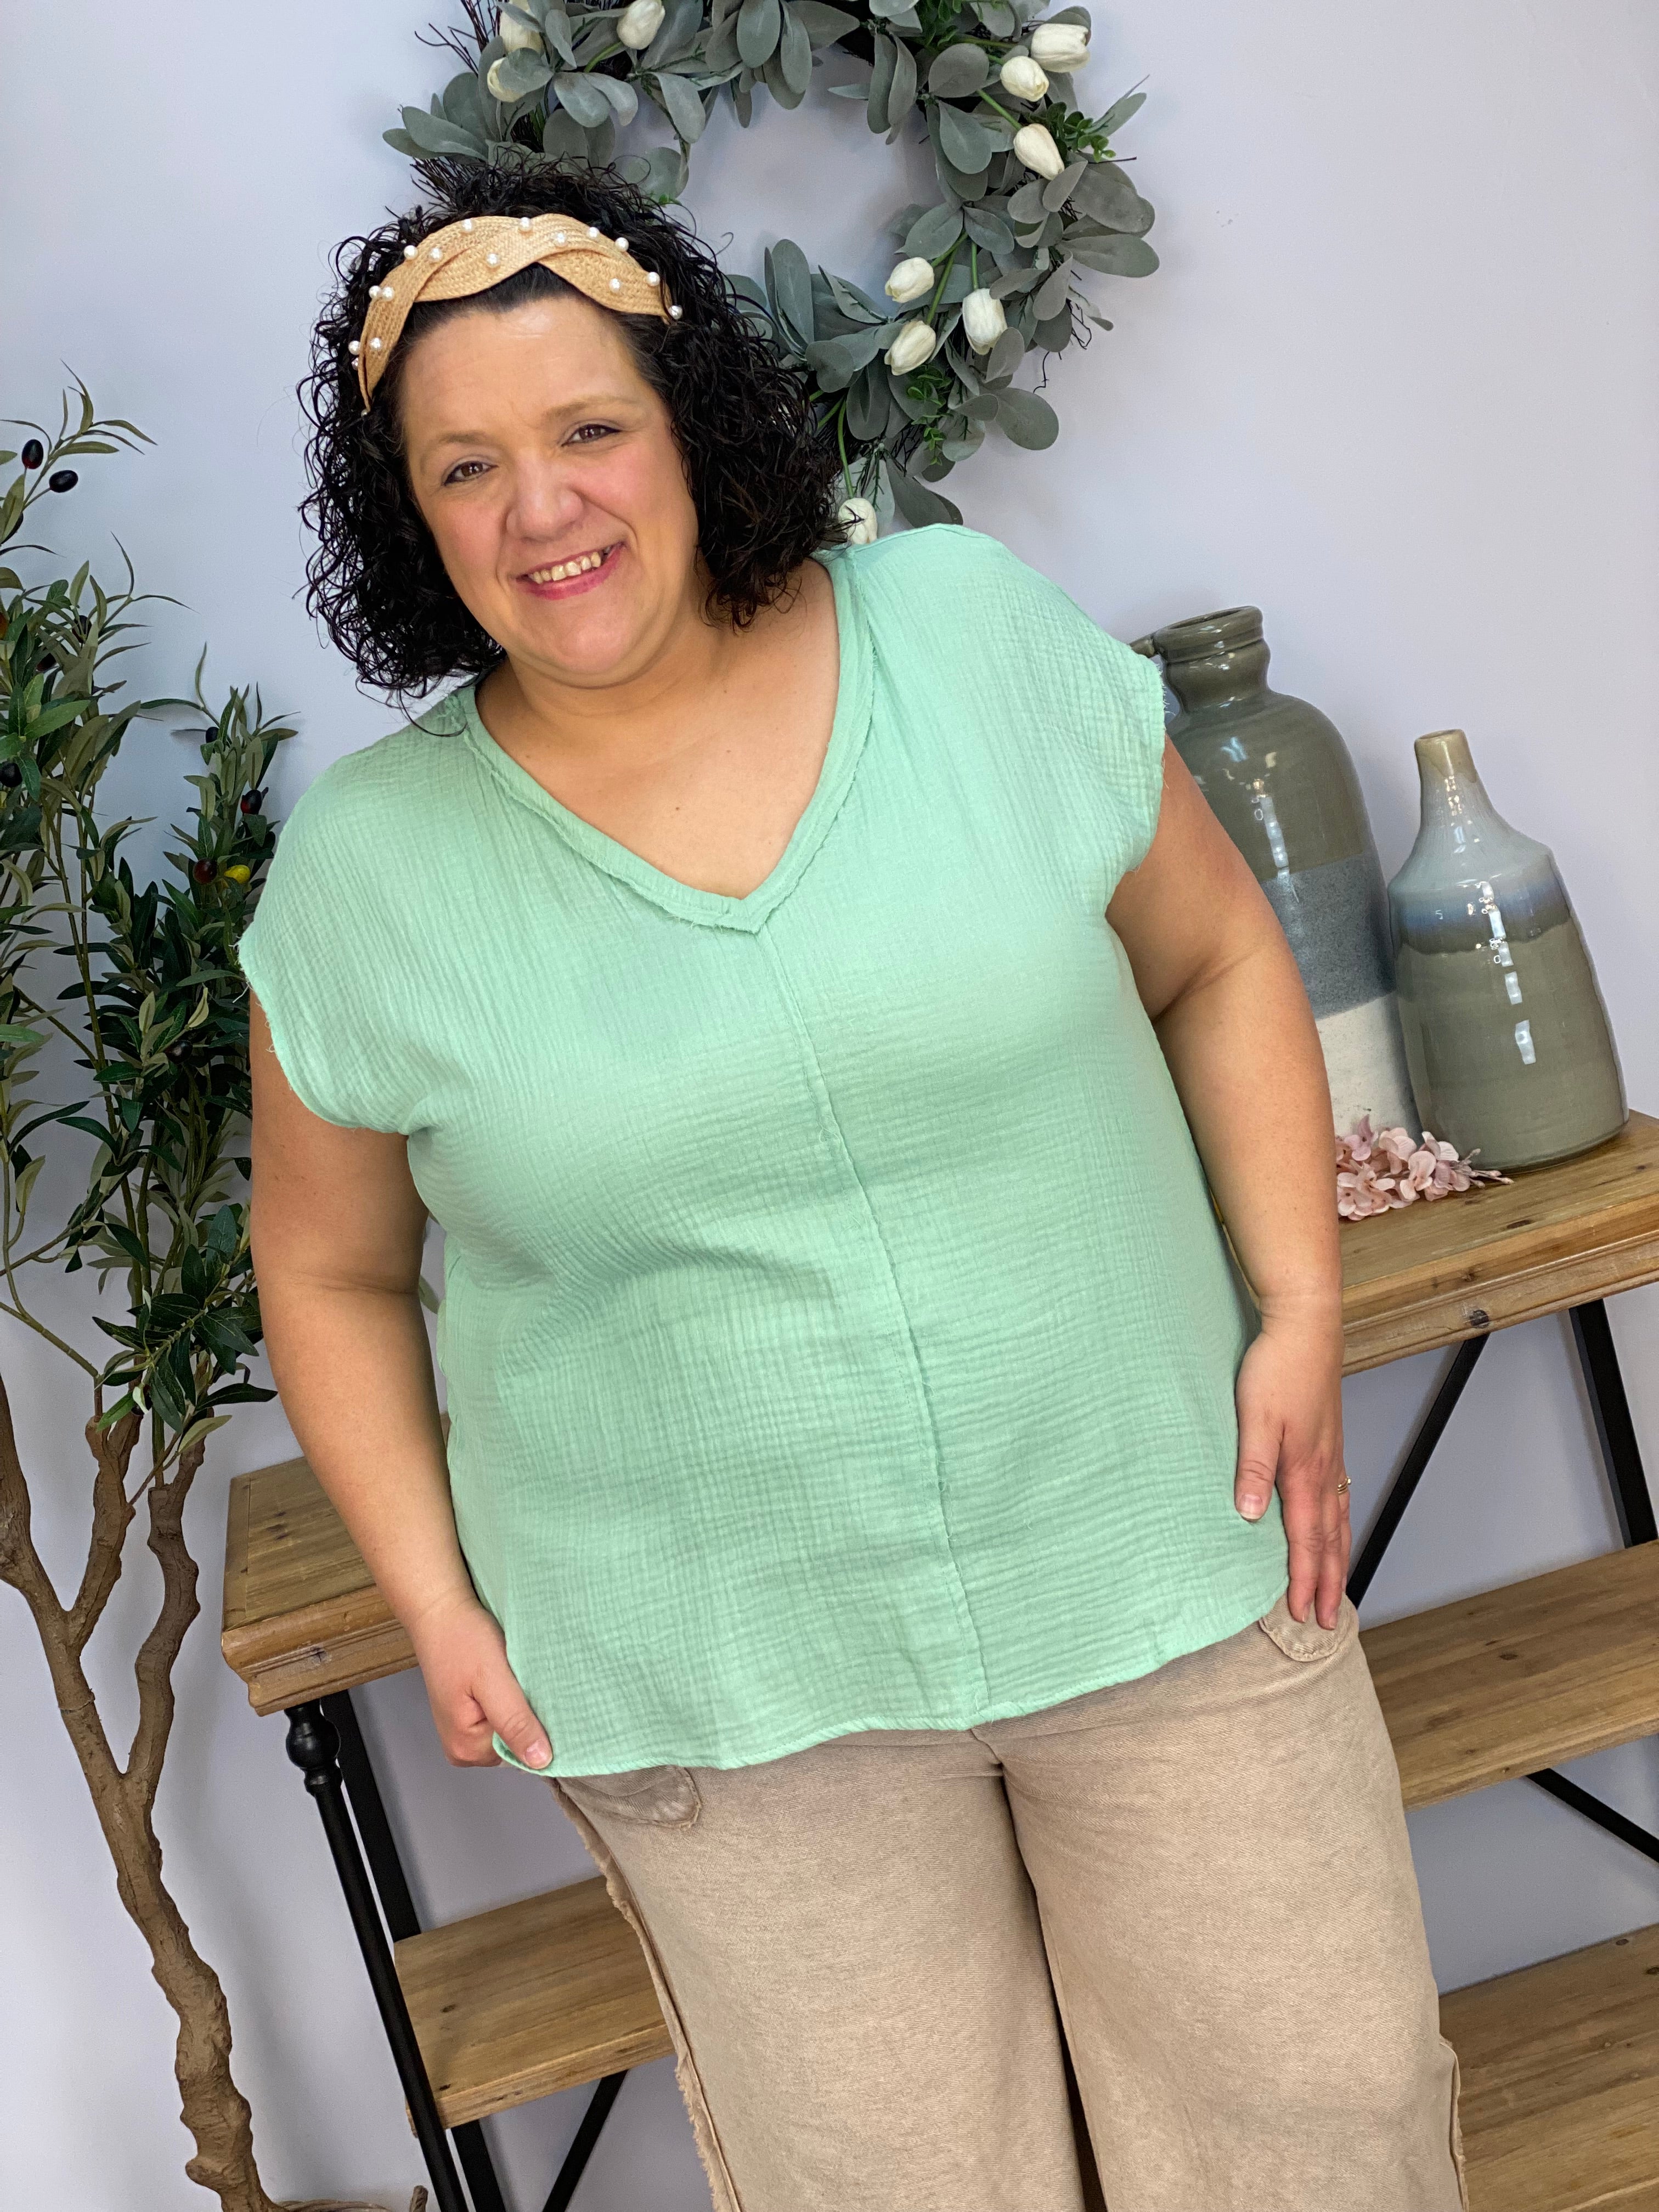 Simple Summer Gauze Top-100 Short Sleeve Tops-The Lovely Closet-The Lovely Closet, Women's Fashion Boutique in Alexandria, KY